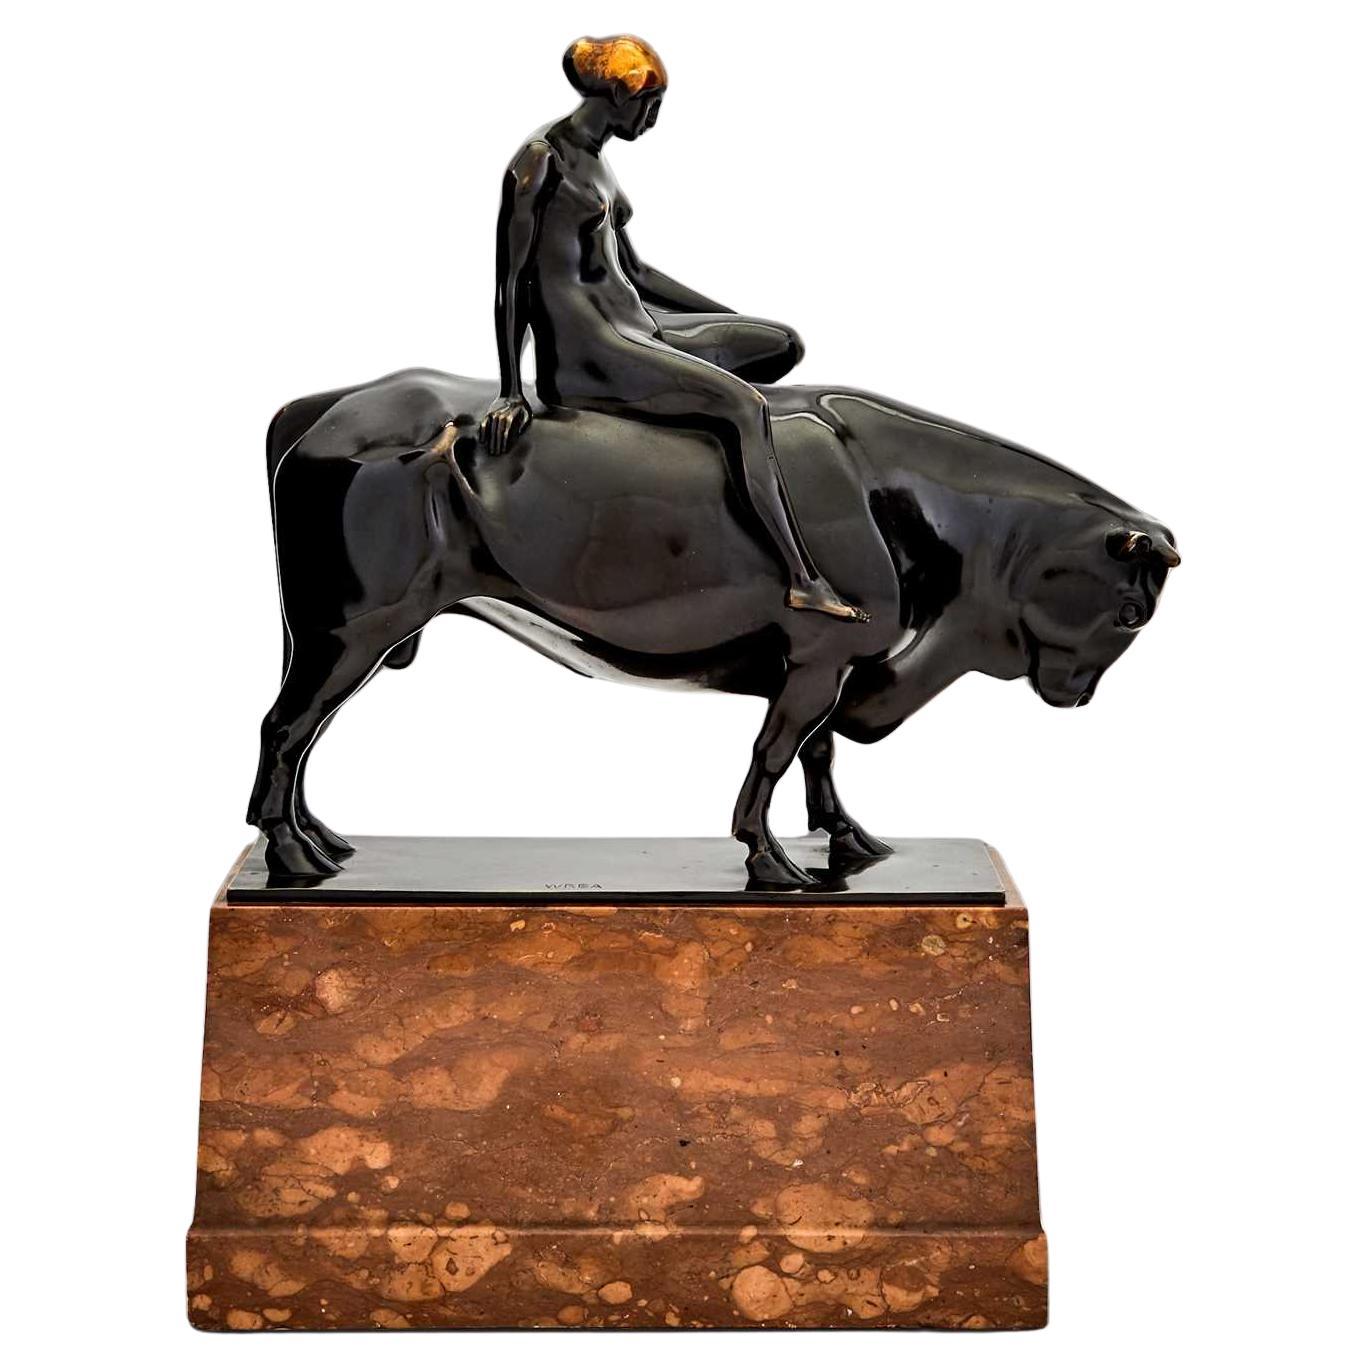 Bronze Sculpture, "Europea and The Bull" by Georg Wrba For Sale